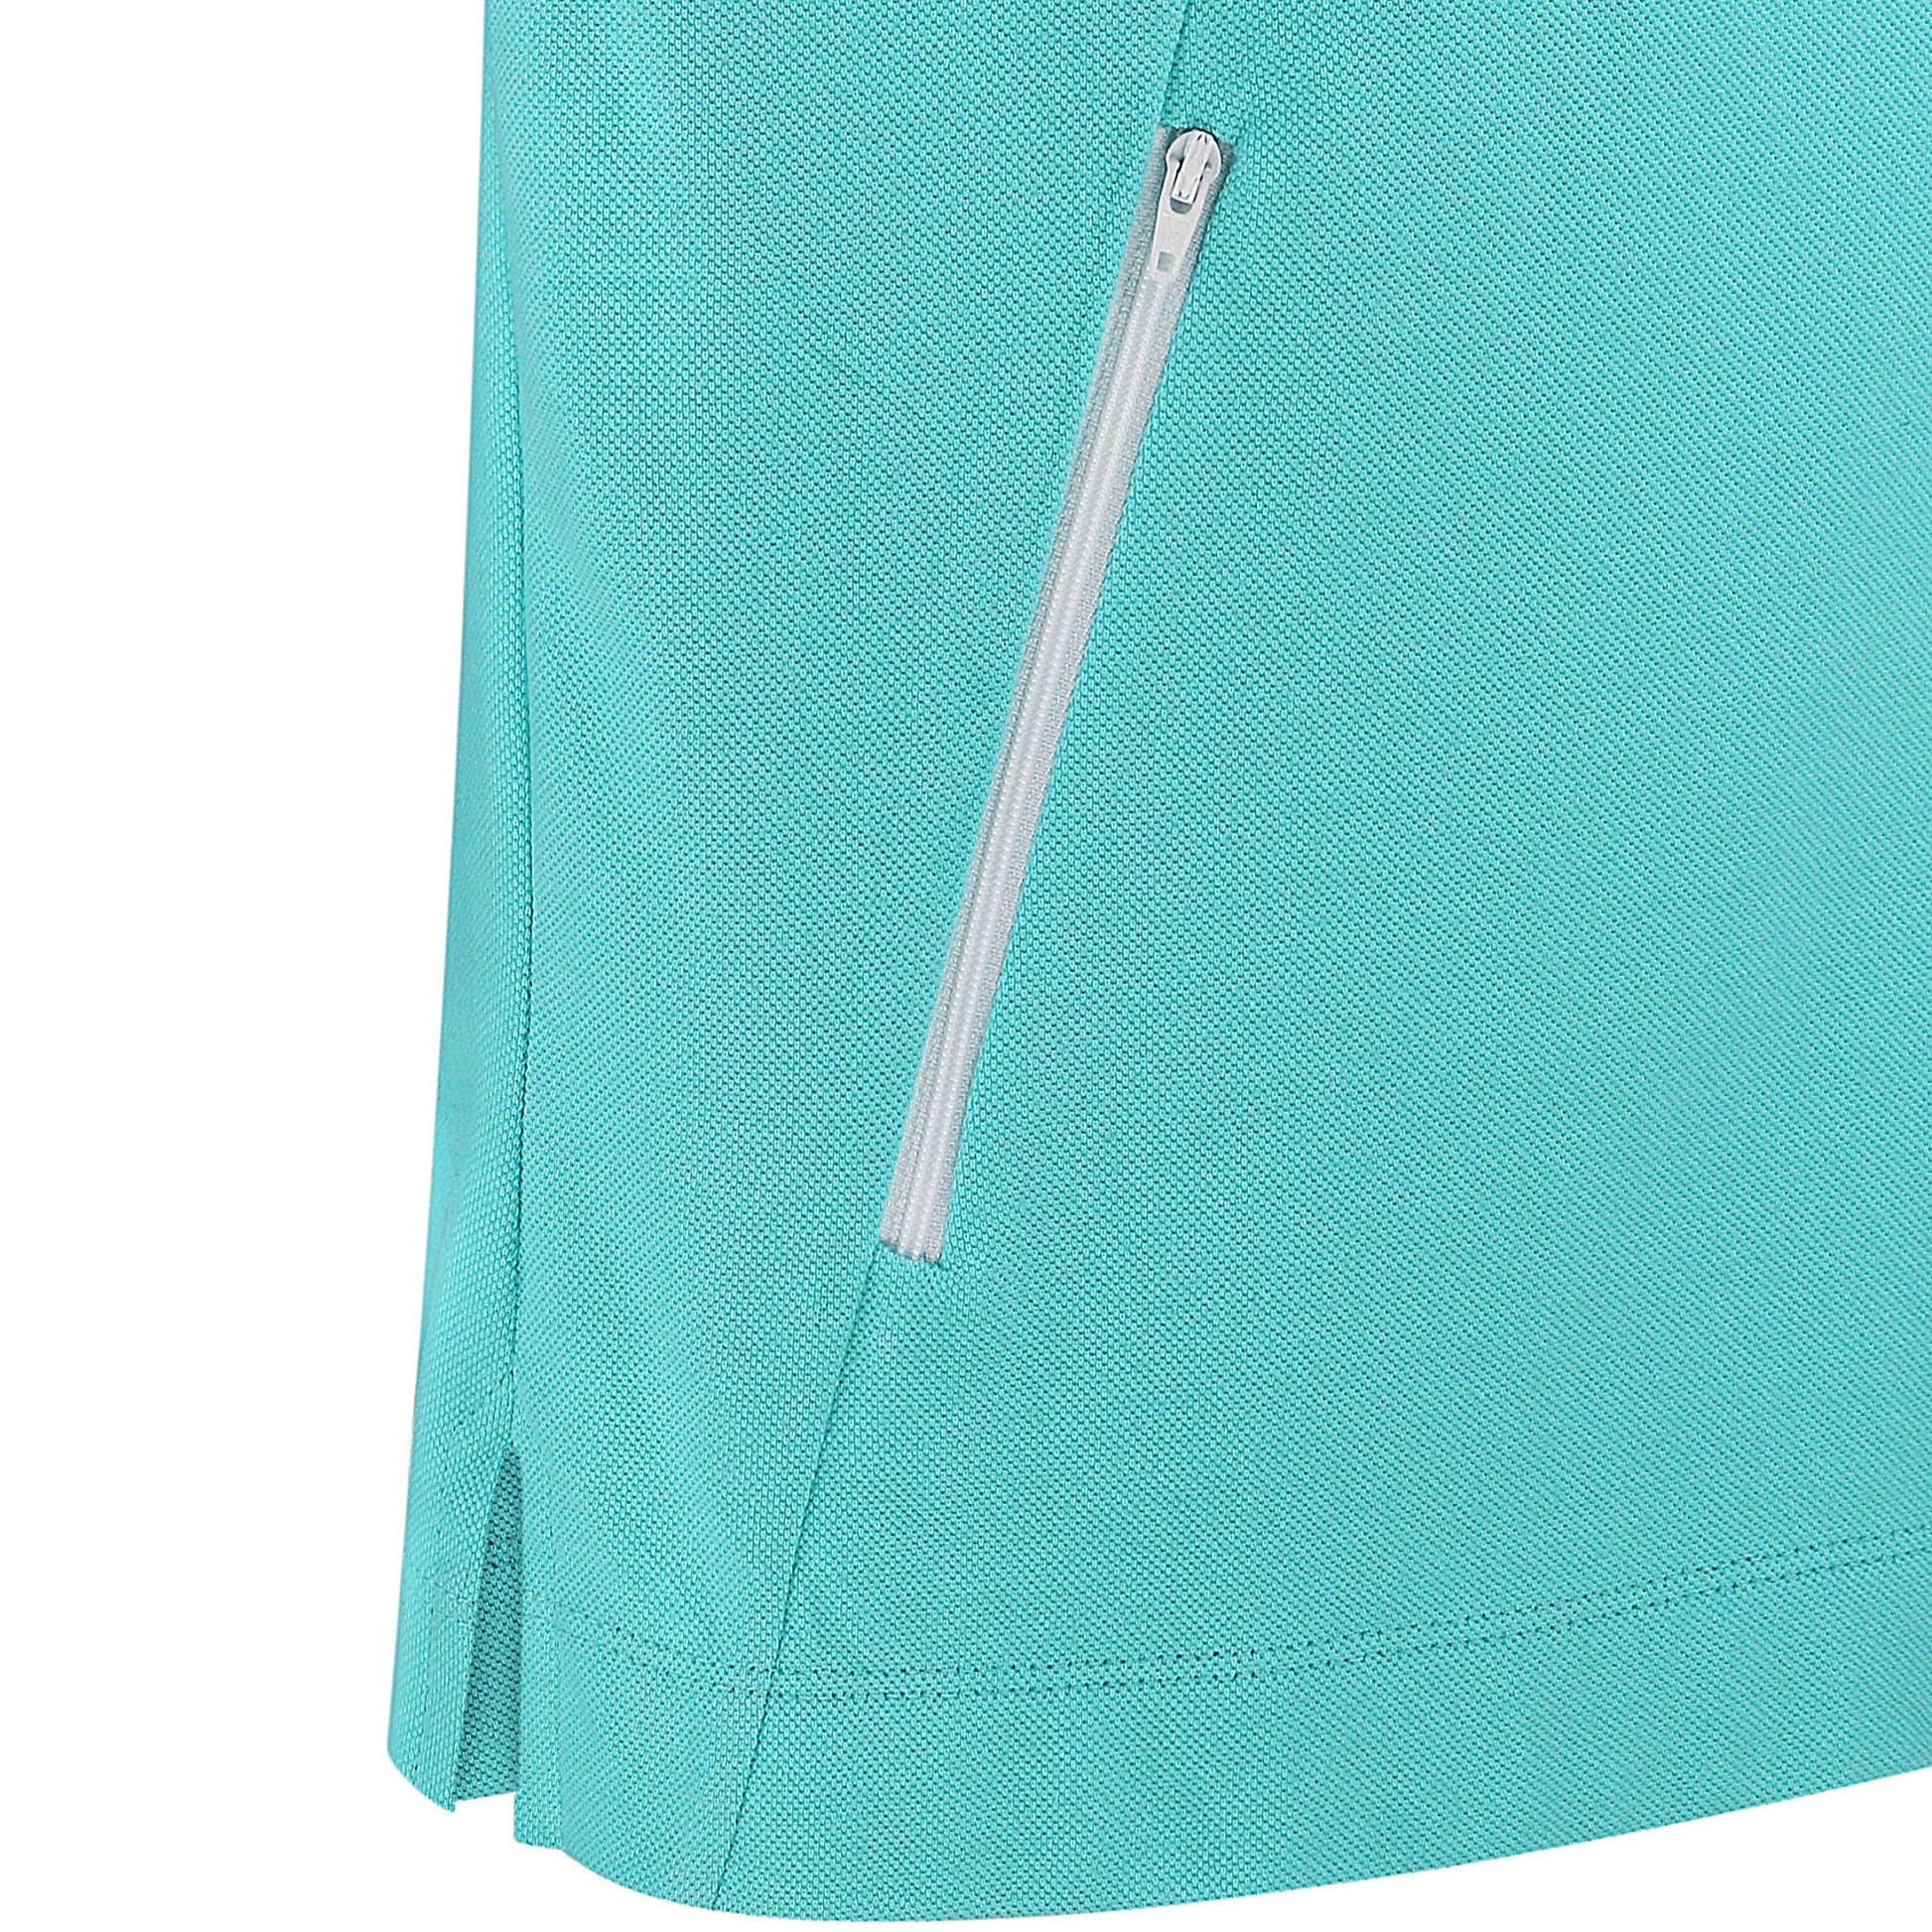 Polo shirt with zip pockets